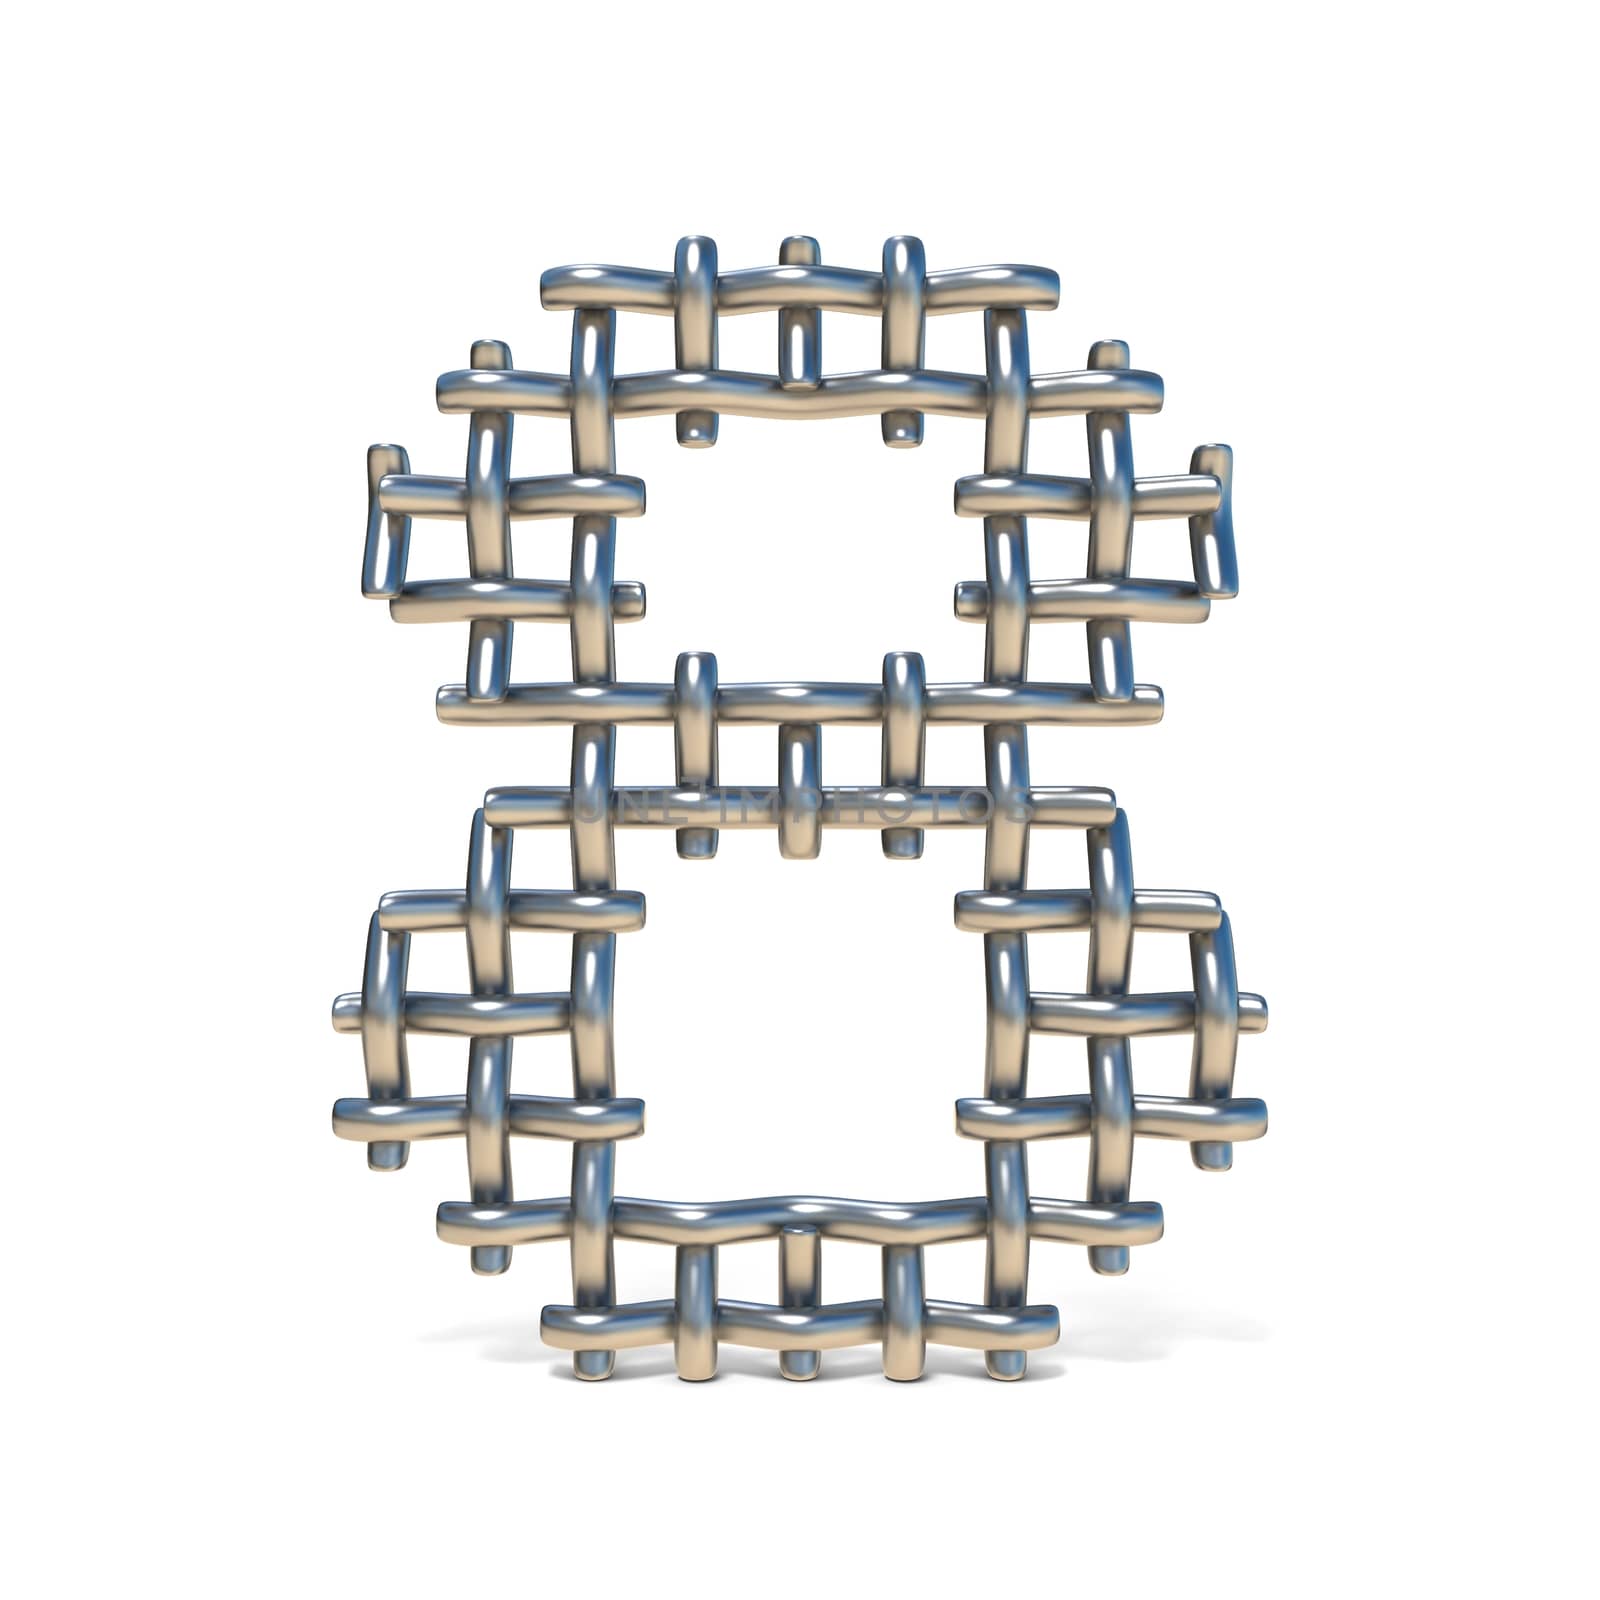 Metal wire mesh font Number 8 EIGHT3D render illustration isolated on white background